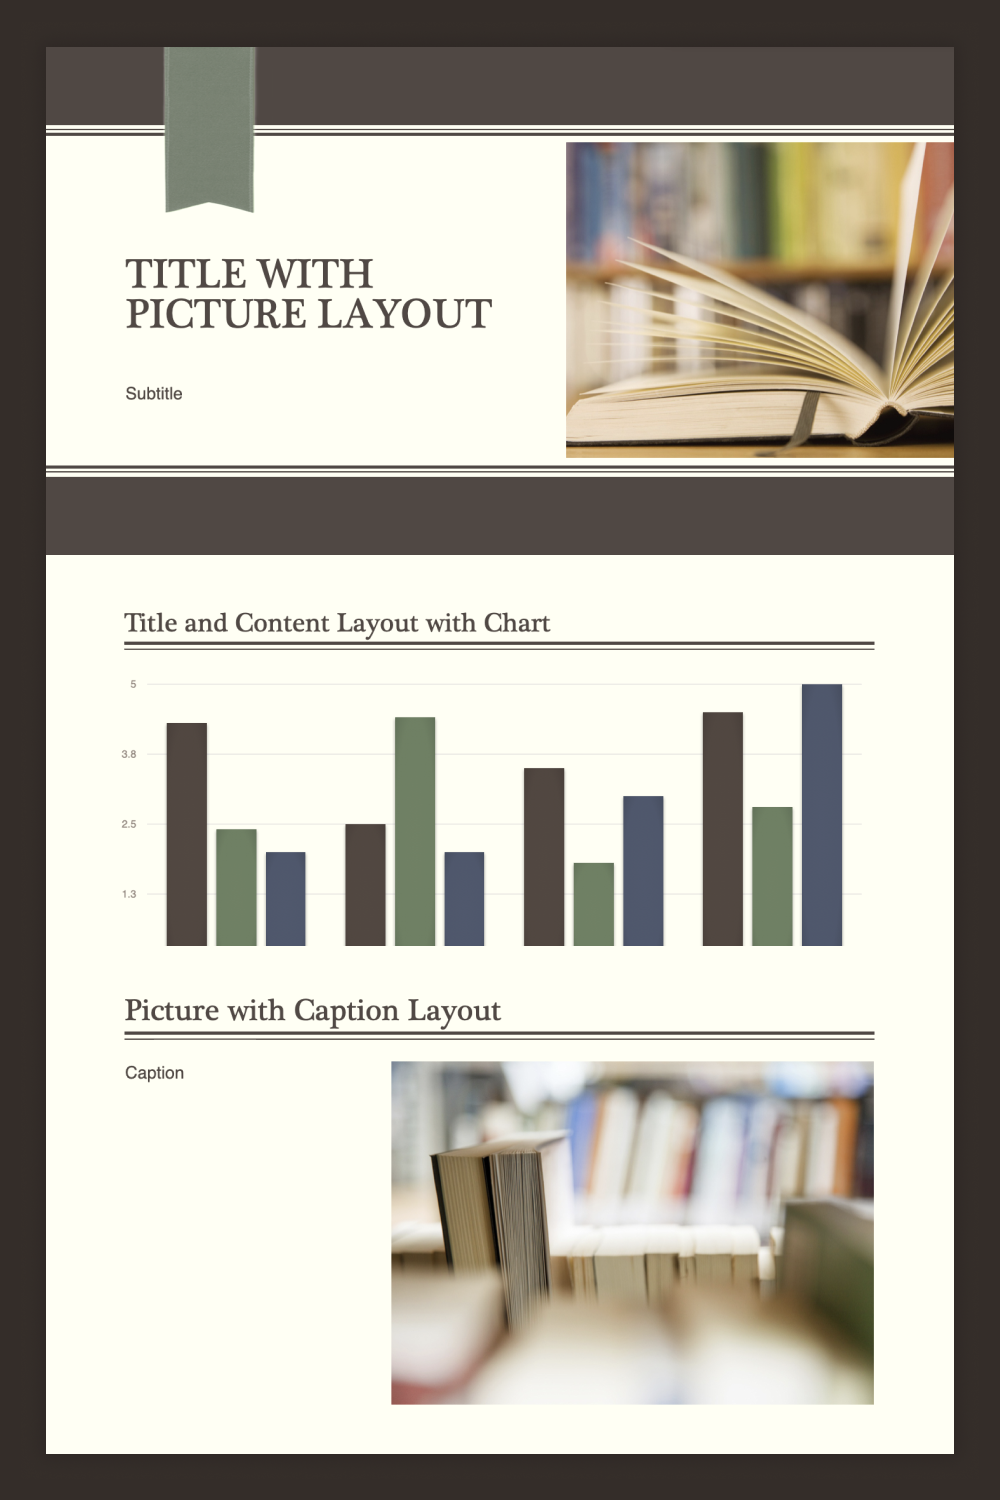 Presentation page with chart and photos of the books.